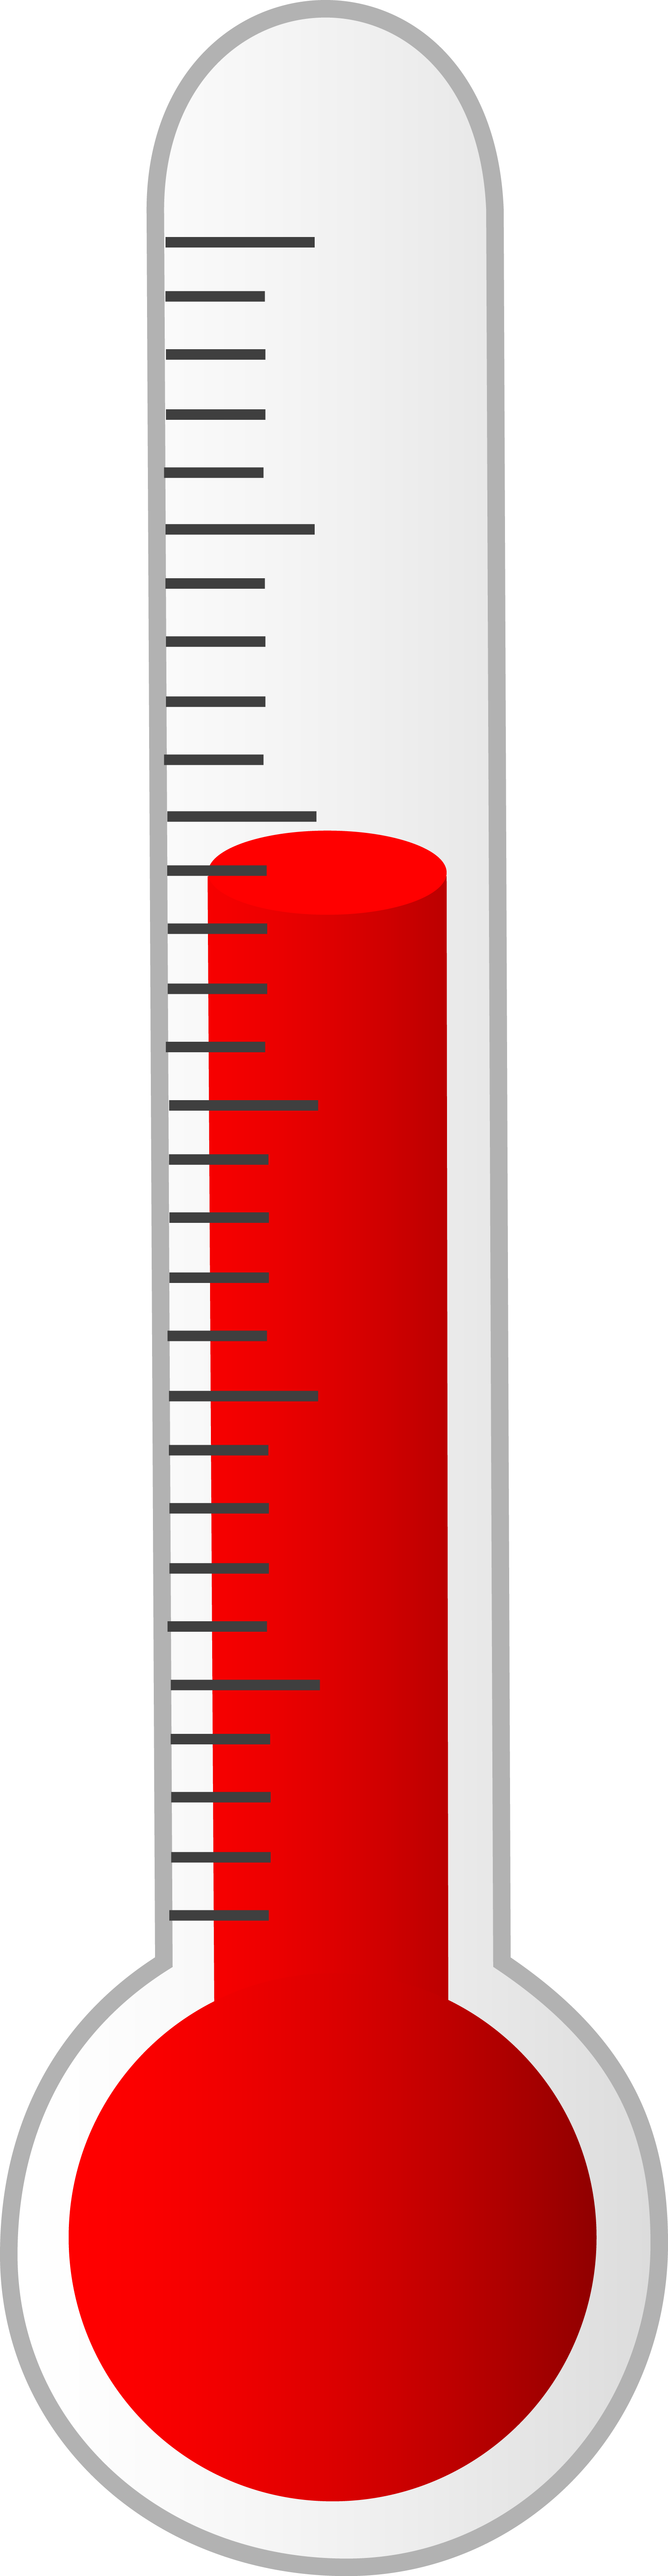 Thermometer clip art for fundraising free - dbclipart.com